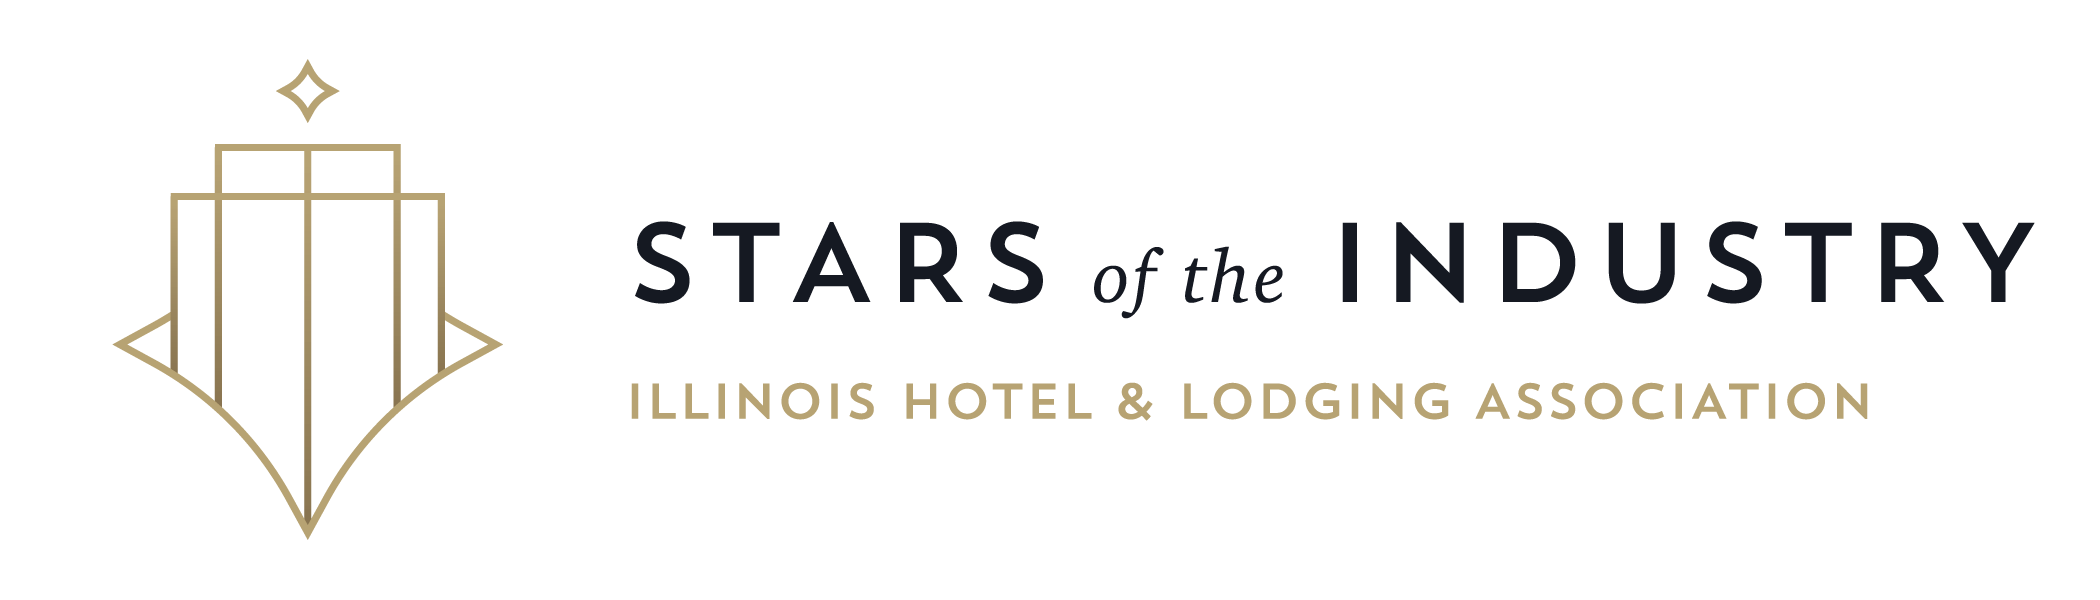 Stars of the Industry Overview Illinois Hotel & Lodging Association